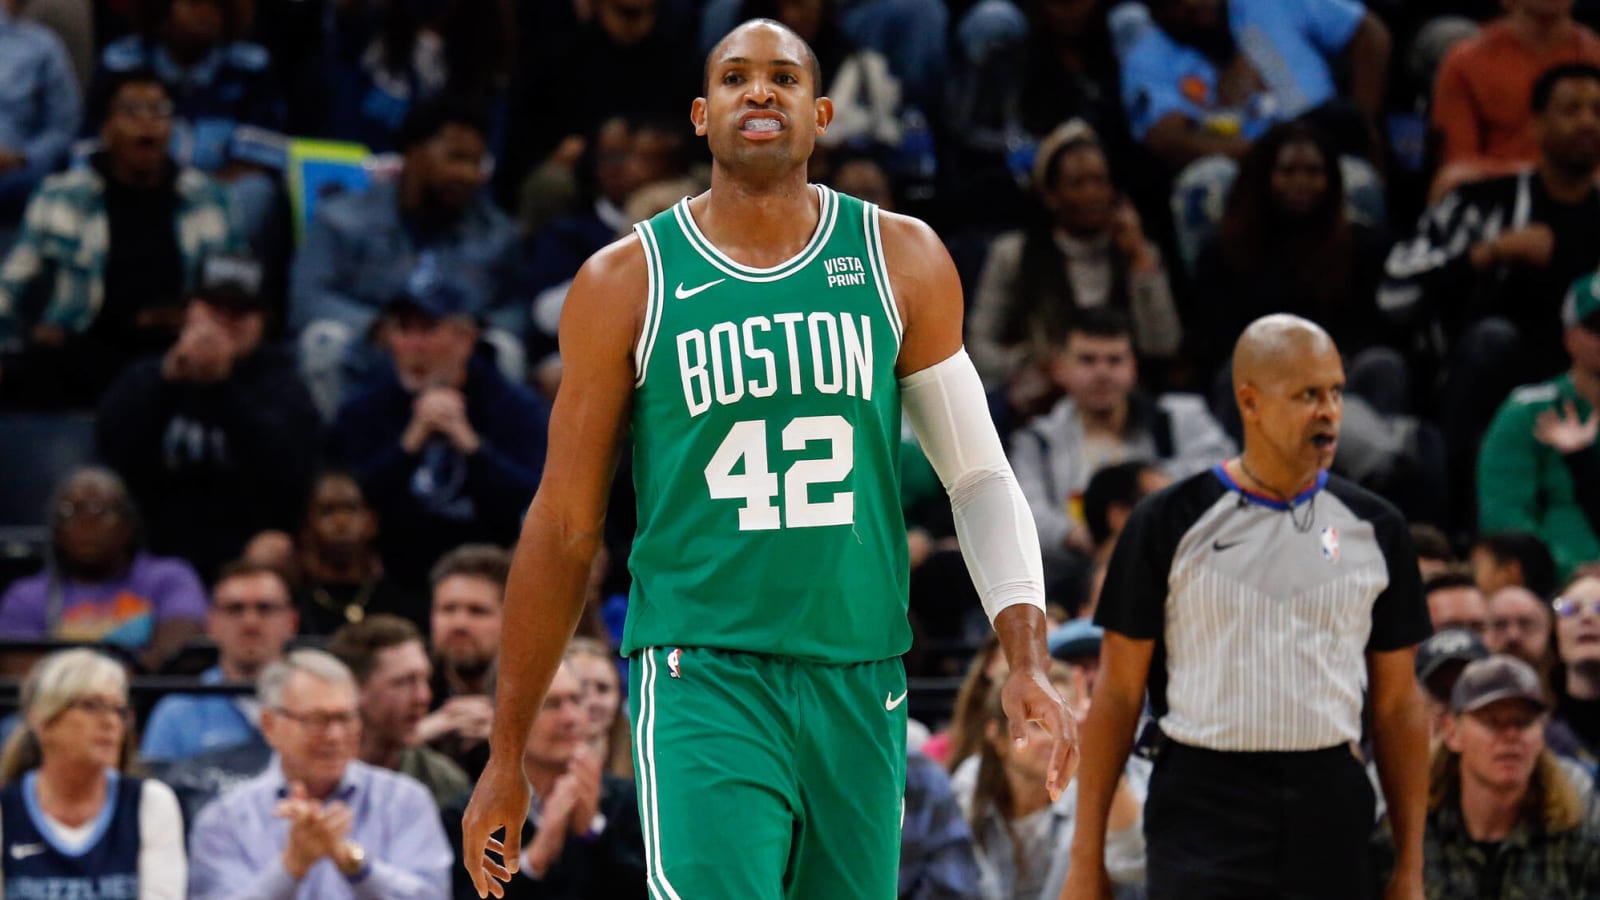 The Celtics now have a complete center rotation